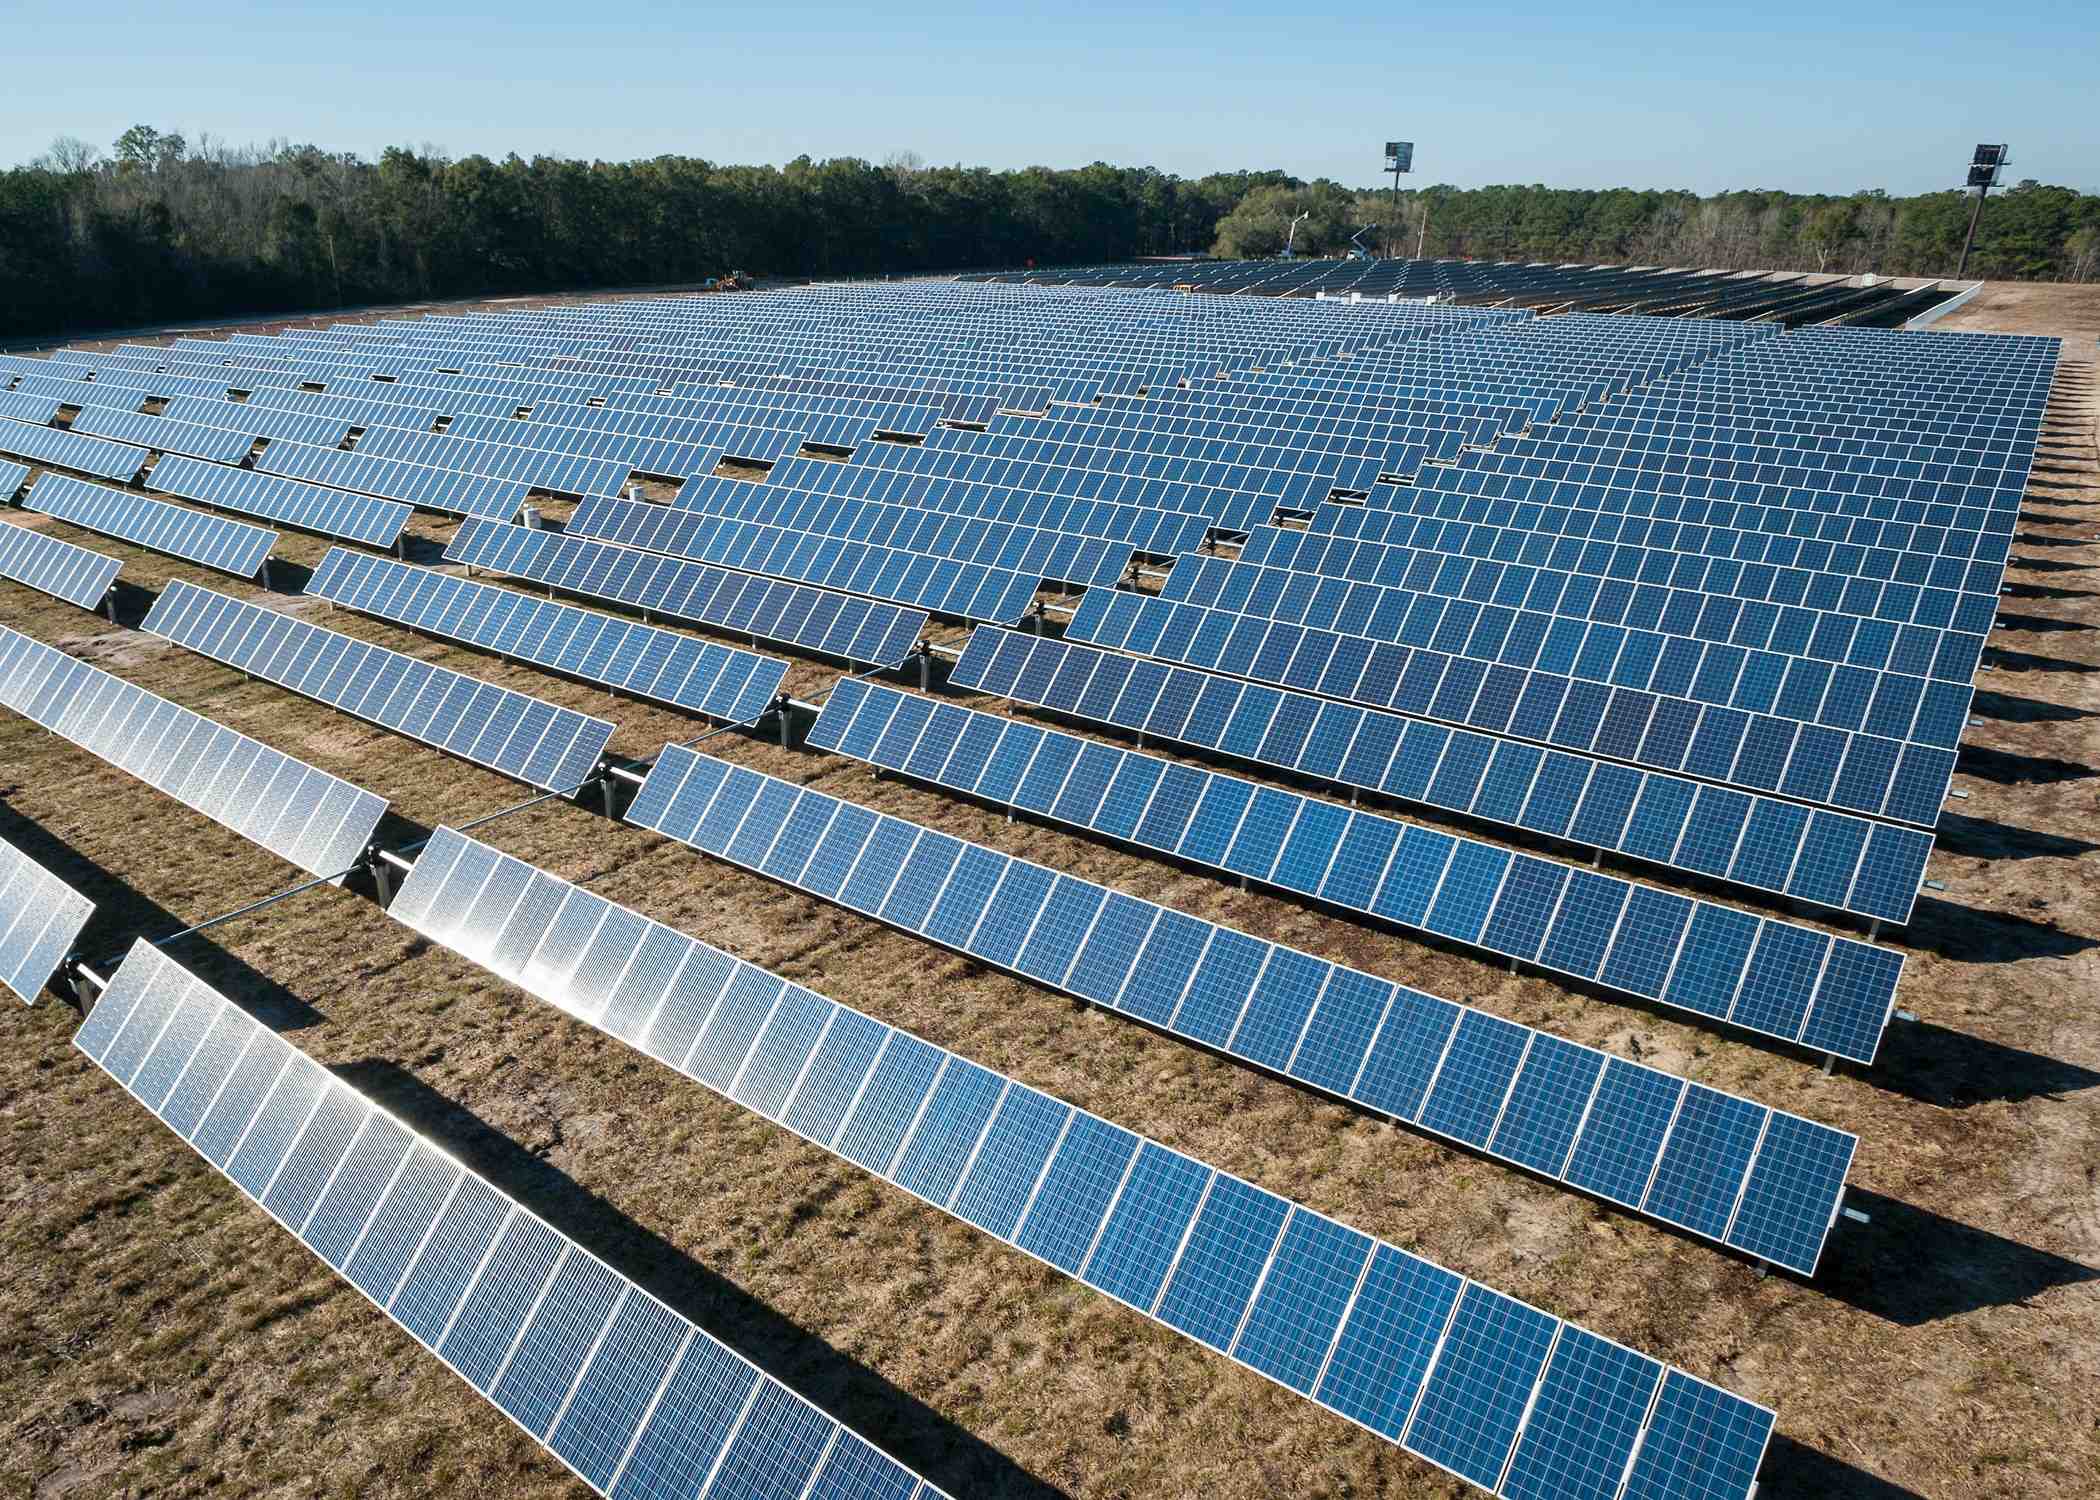 How much does a 1 acre solar farm cost?